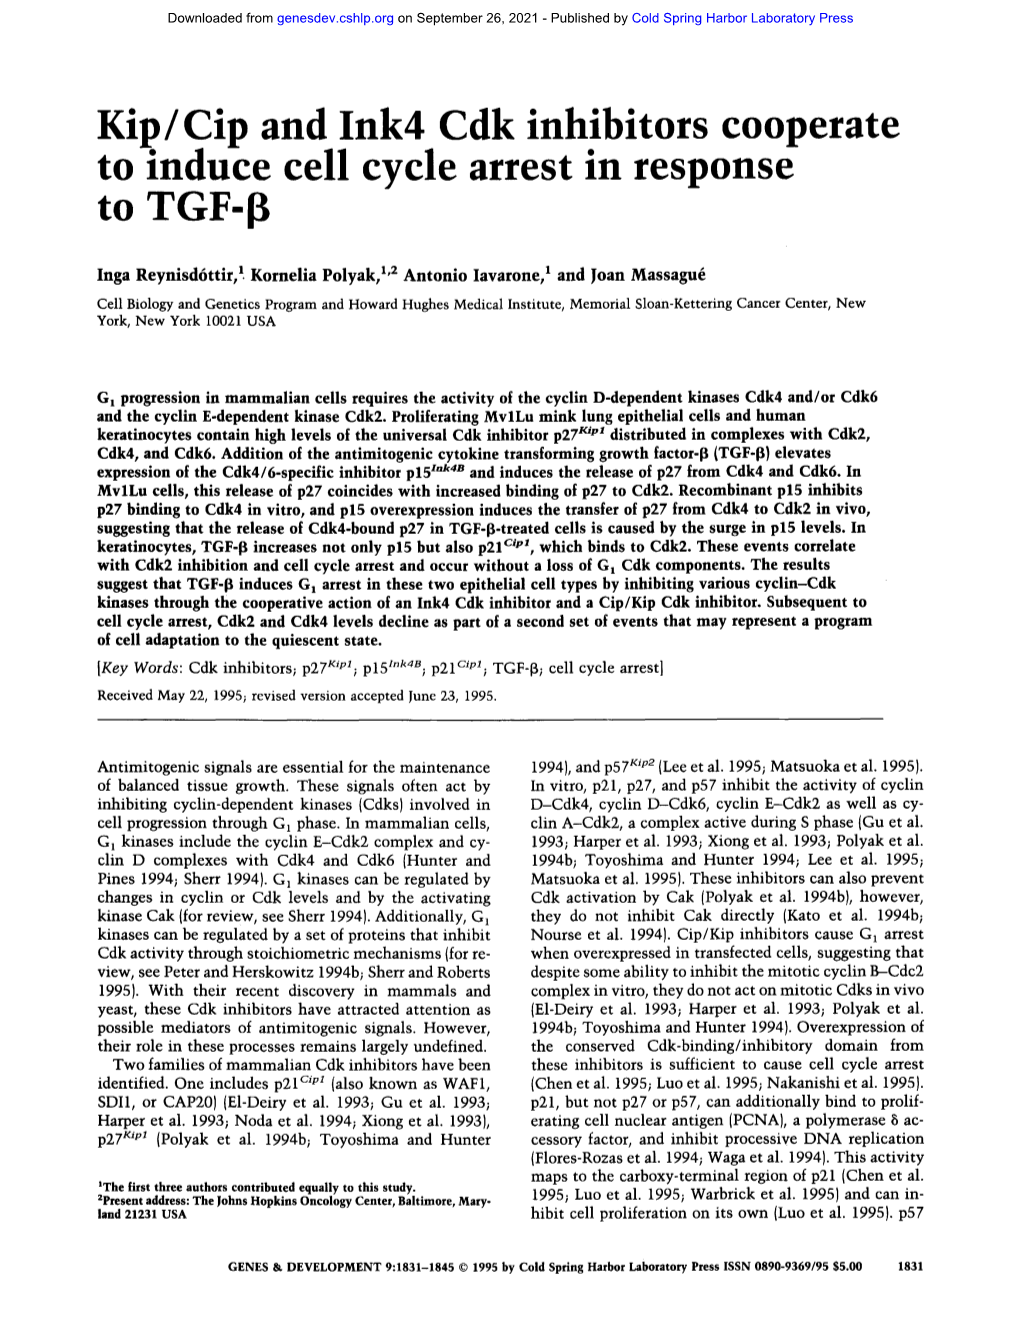 Kip/Cip and Ink4 Cdk Inhibitors Cooperate to Induce Cell Cycle Arrest in Response to TGF-[3